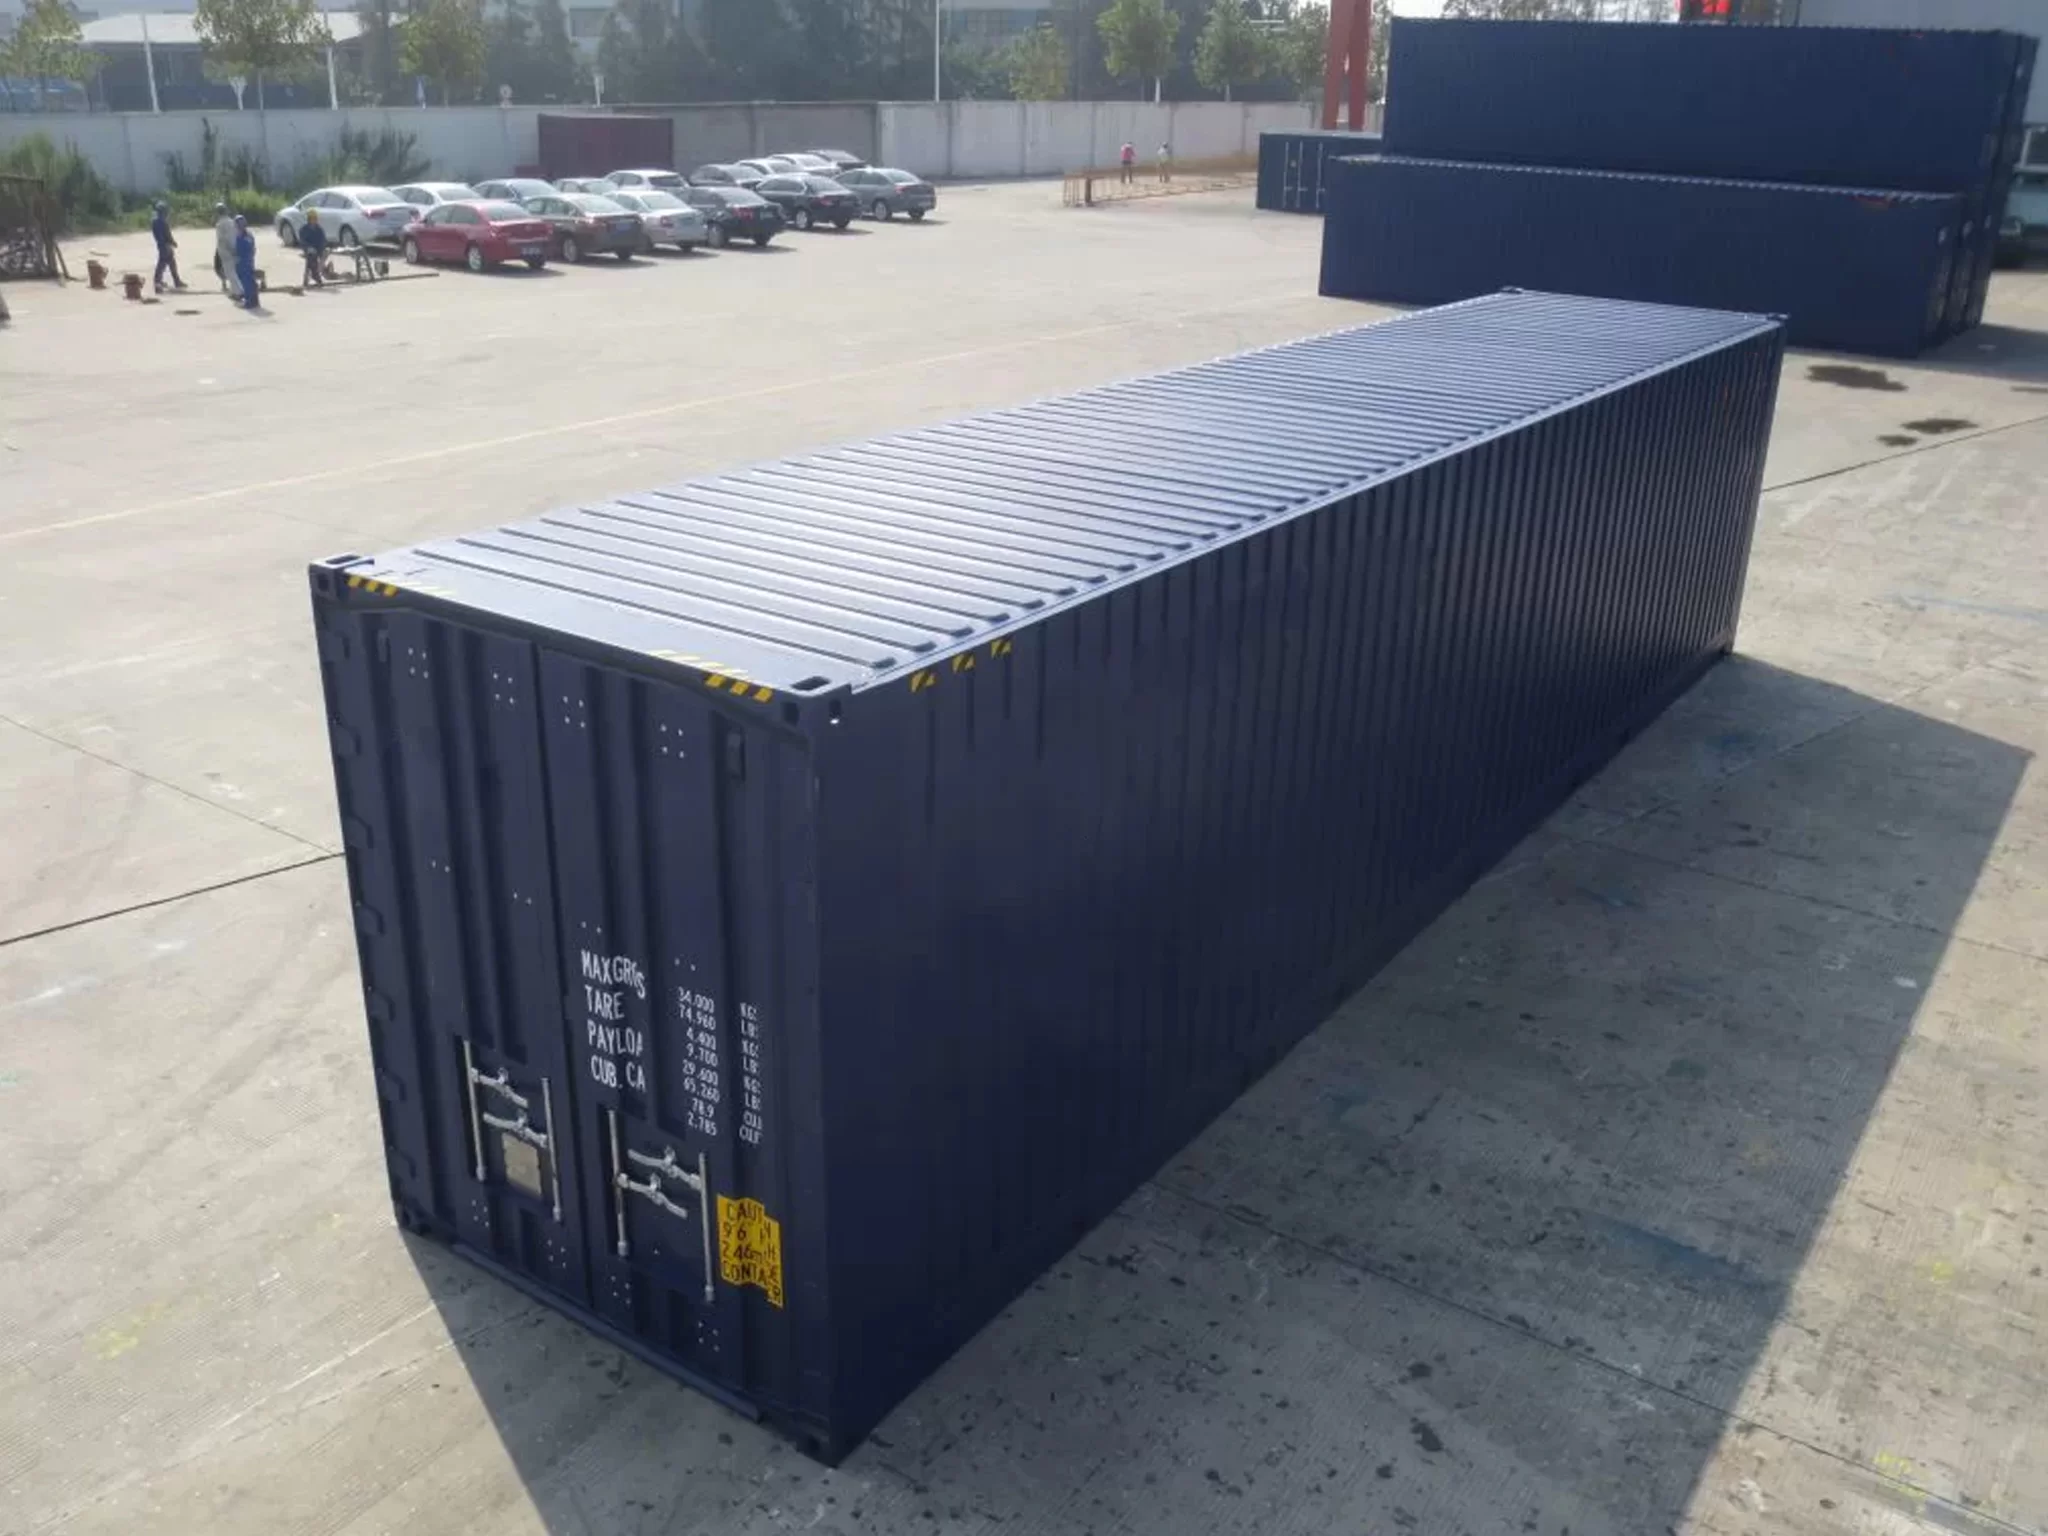 Shipping containers for sale in Appleton